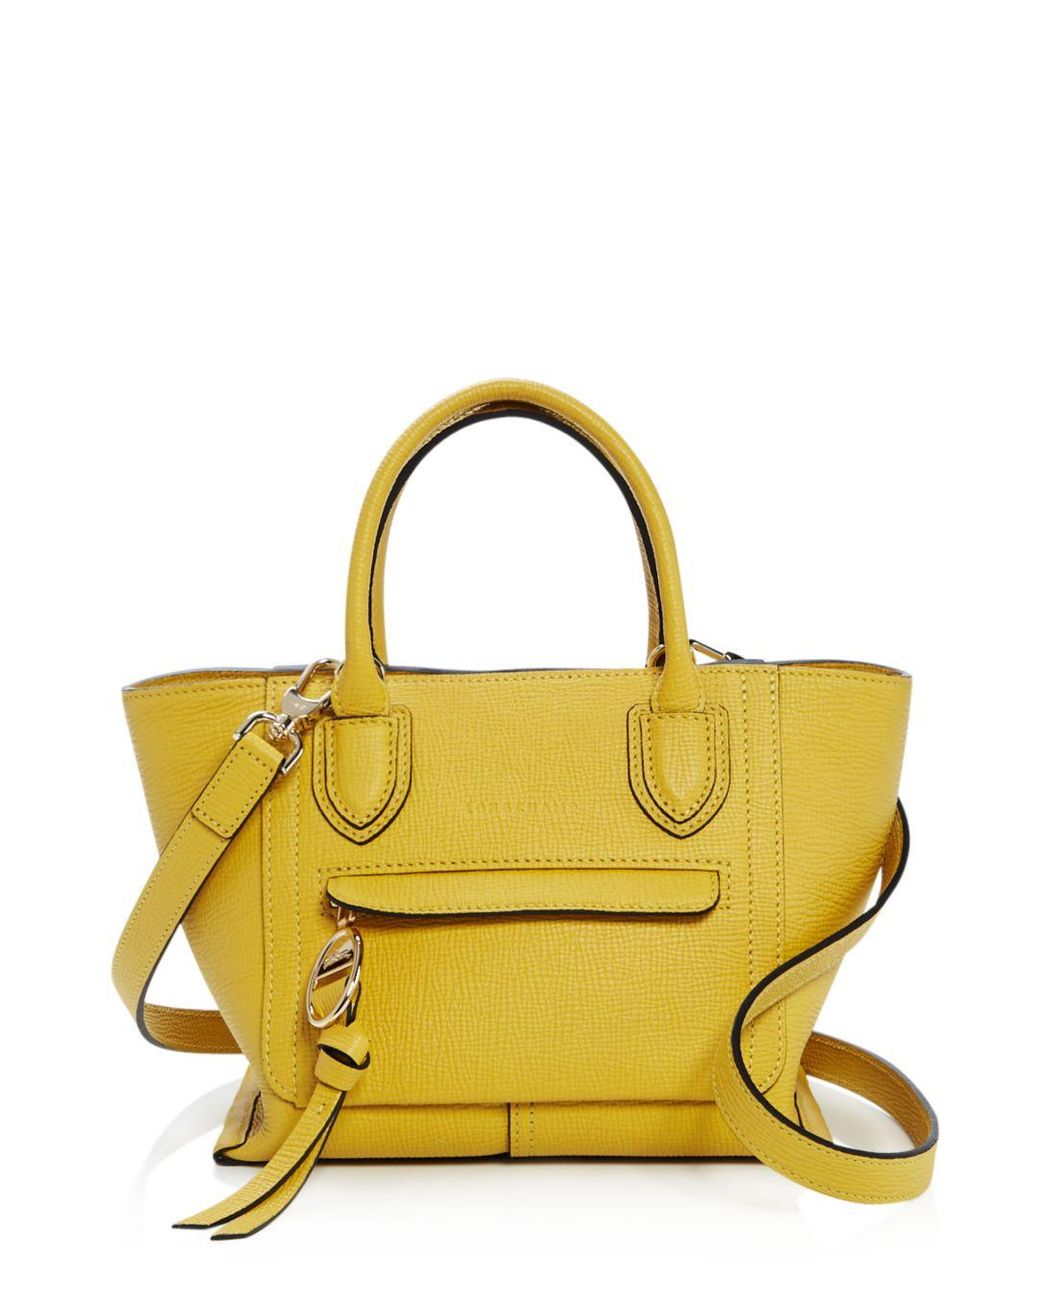 Longchamp Mailbox Small Leather Crossbody Bag in Yellow | Lyst